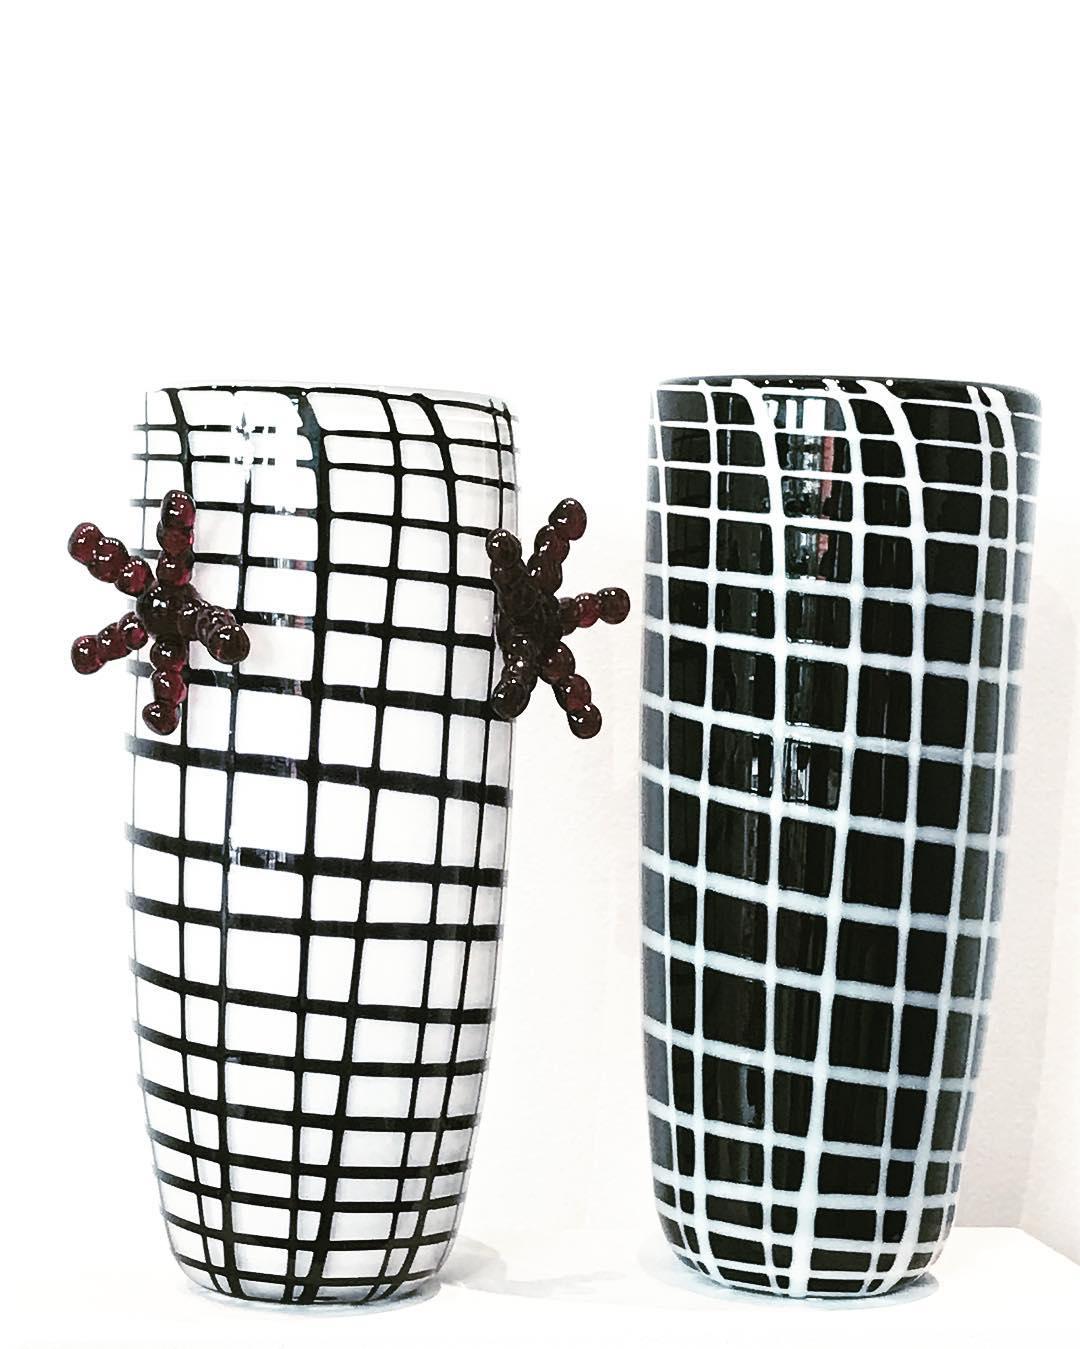 This unique vase designed by Elena Cutolo for Purho is part of a limited edition inspired by Andy Warhol's muse, Edie Sedgwick. An icon of the 60s style, Edie is represented here in a stylized rendition of her oversized black and white checkers